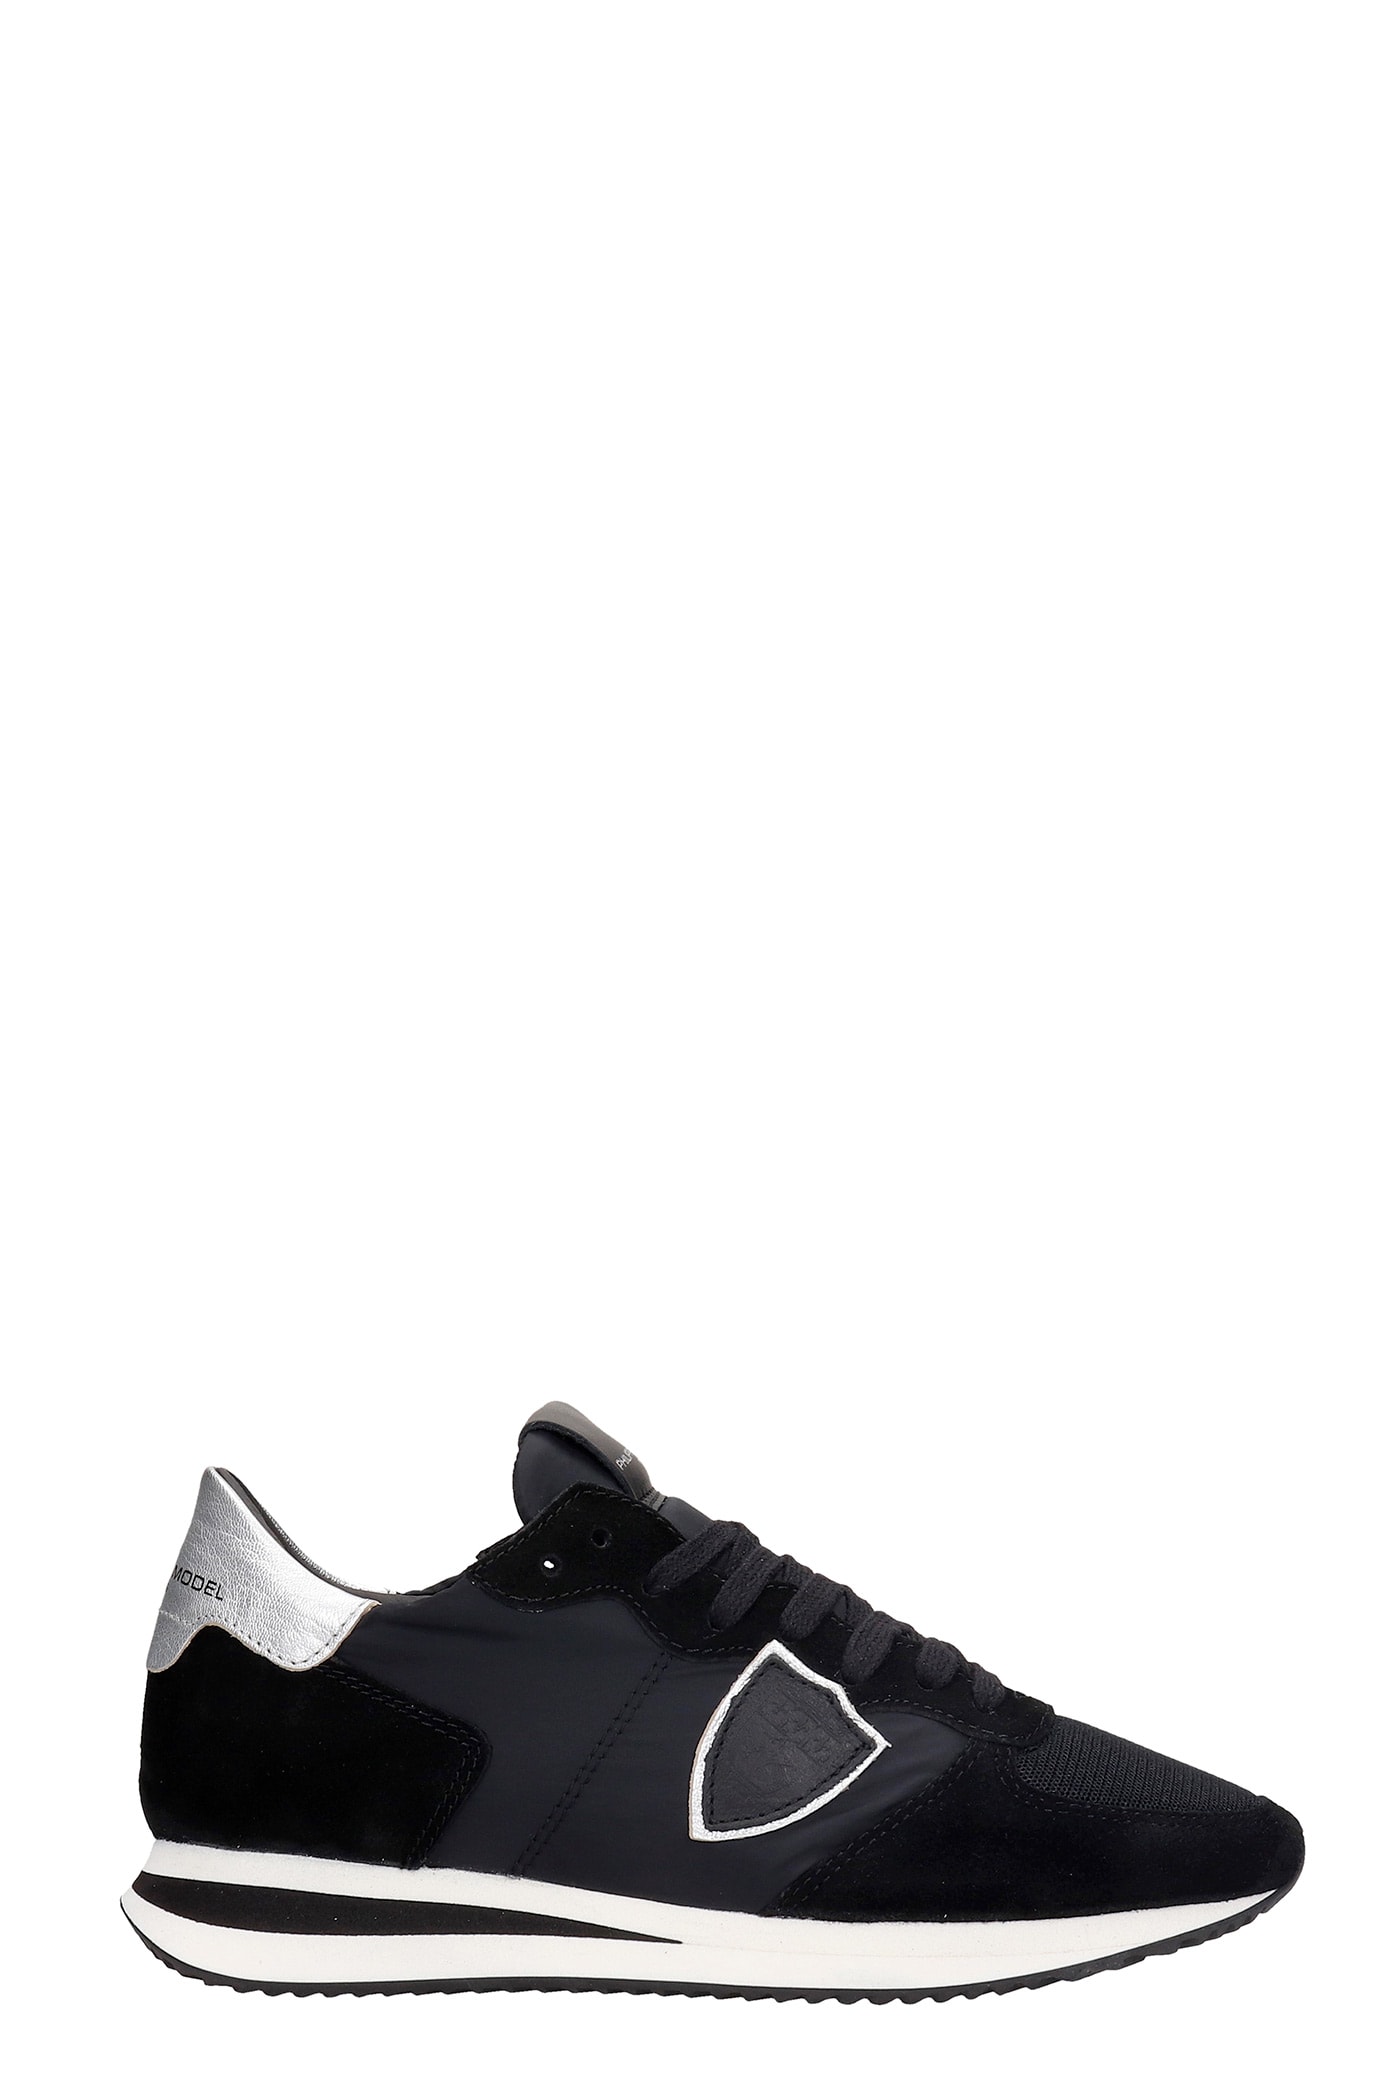 Philippe Model Trpx Sneakers In Black Suede And Fabric